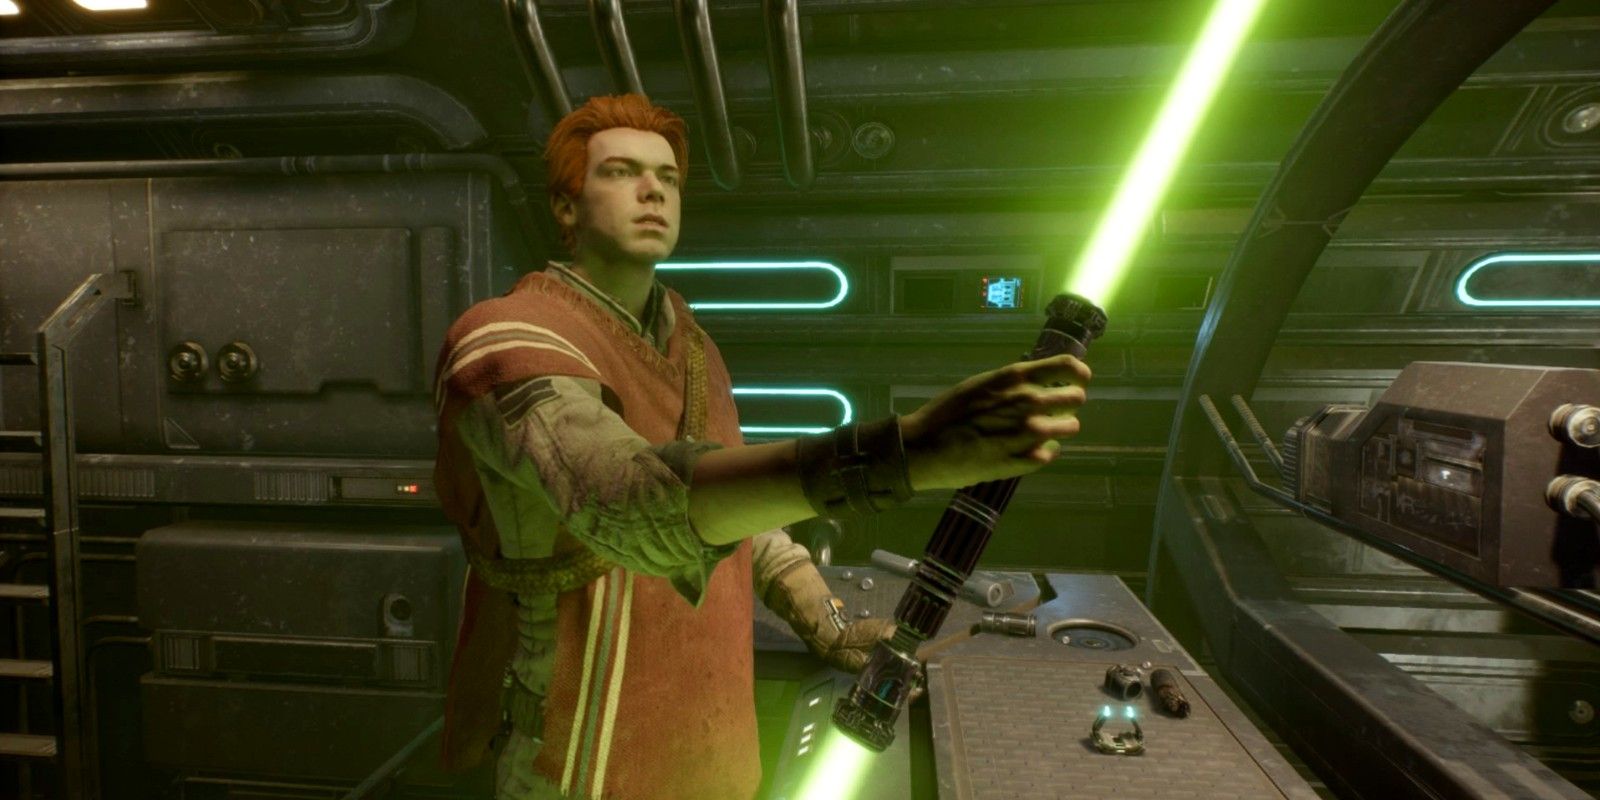 Cal uses a double-bladed lightsaber in Star Wars Jedi: Fallen Order